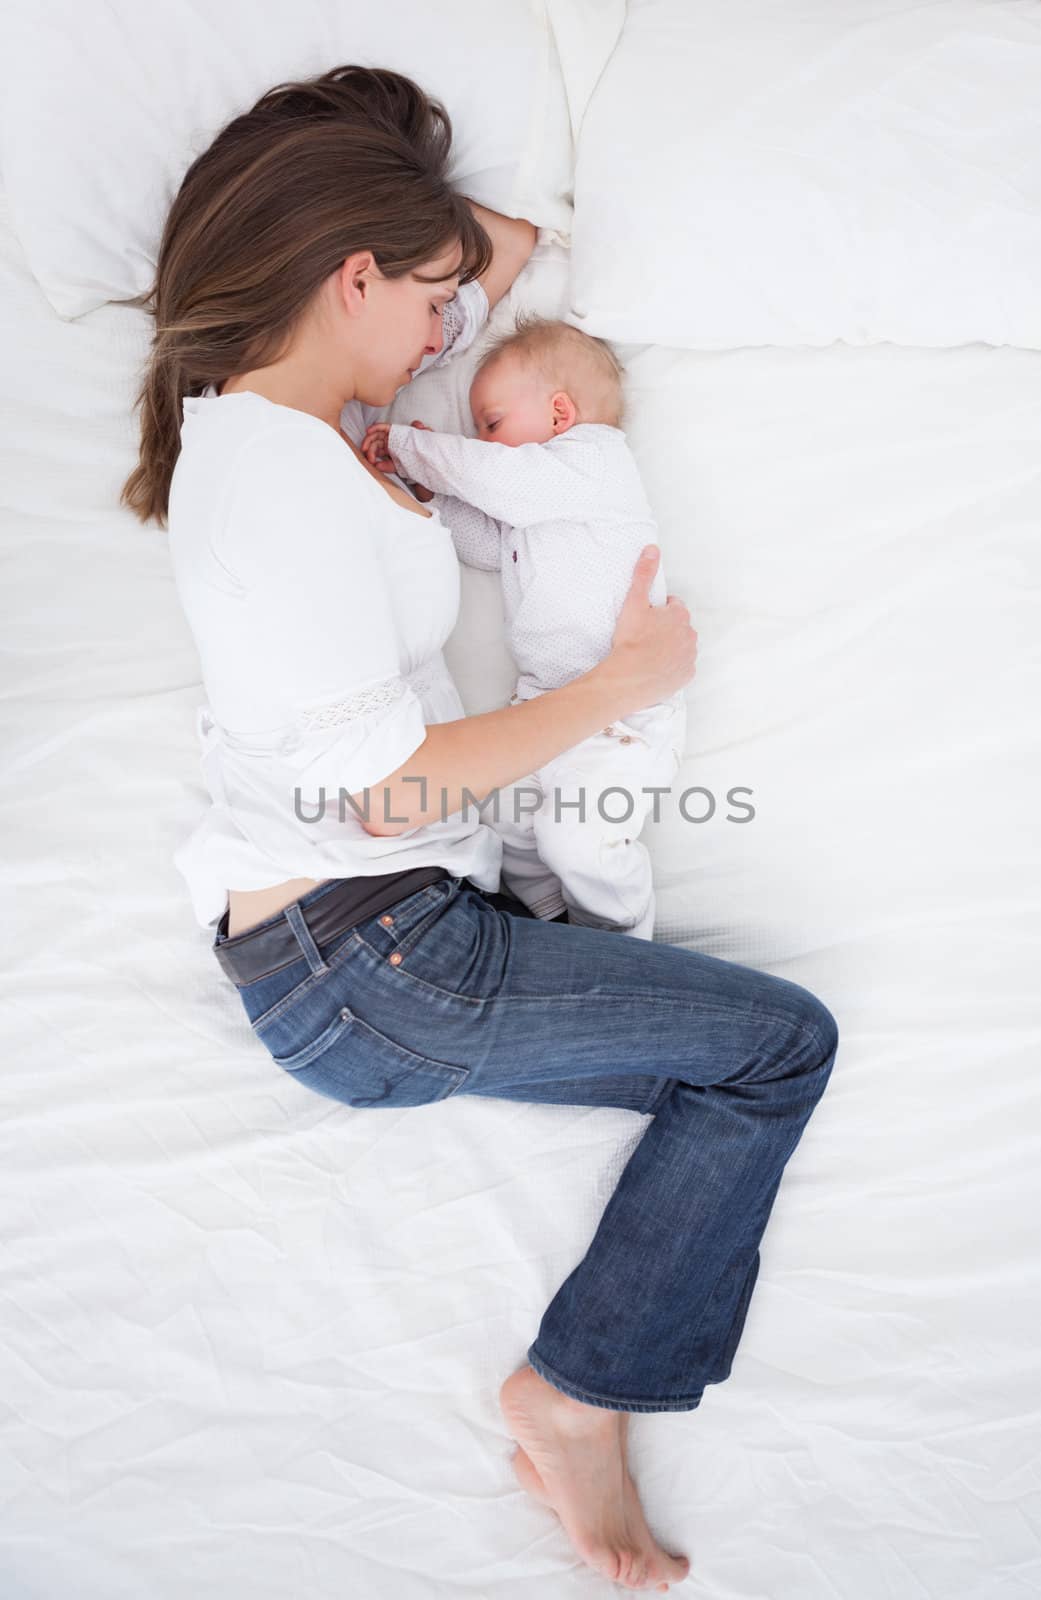 Brunette woman lying next to her baby in a bedroom